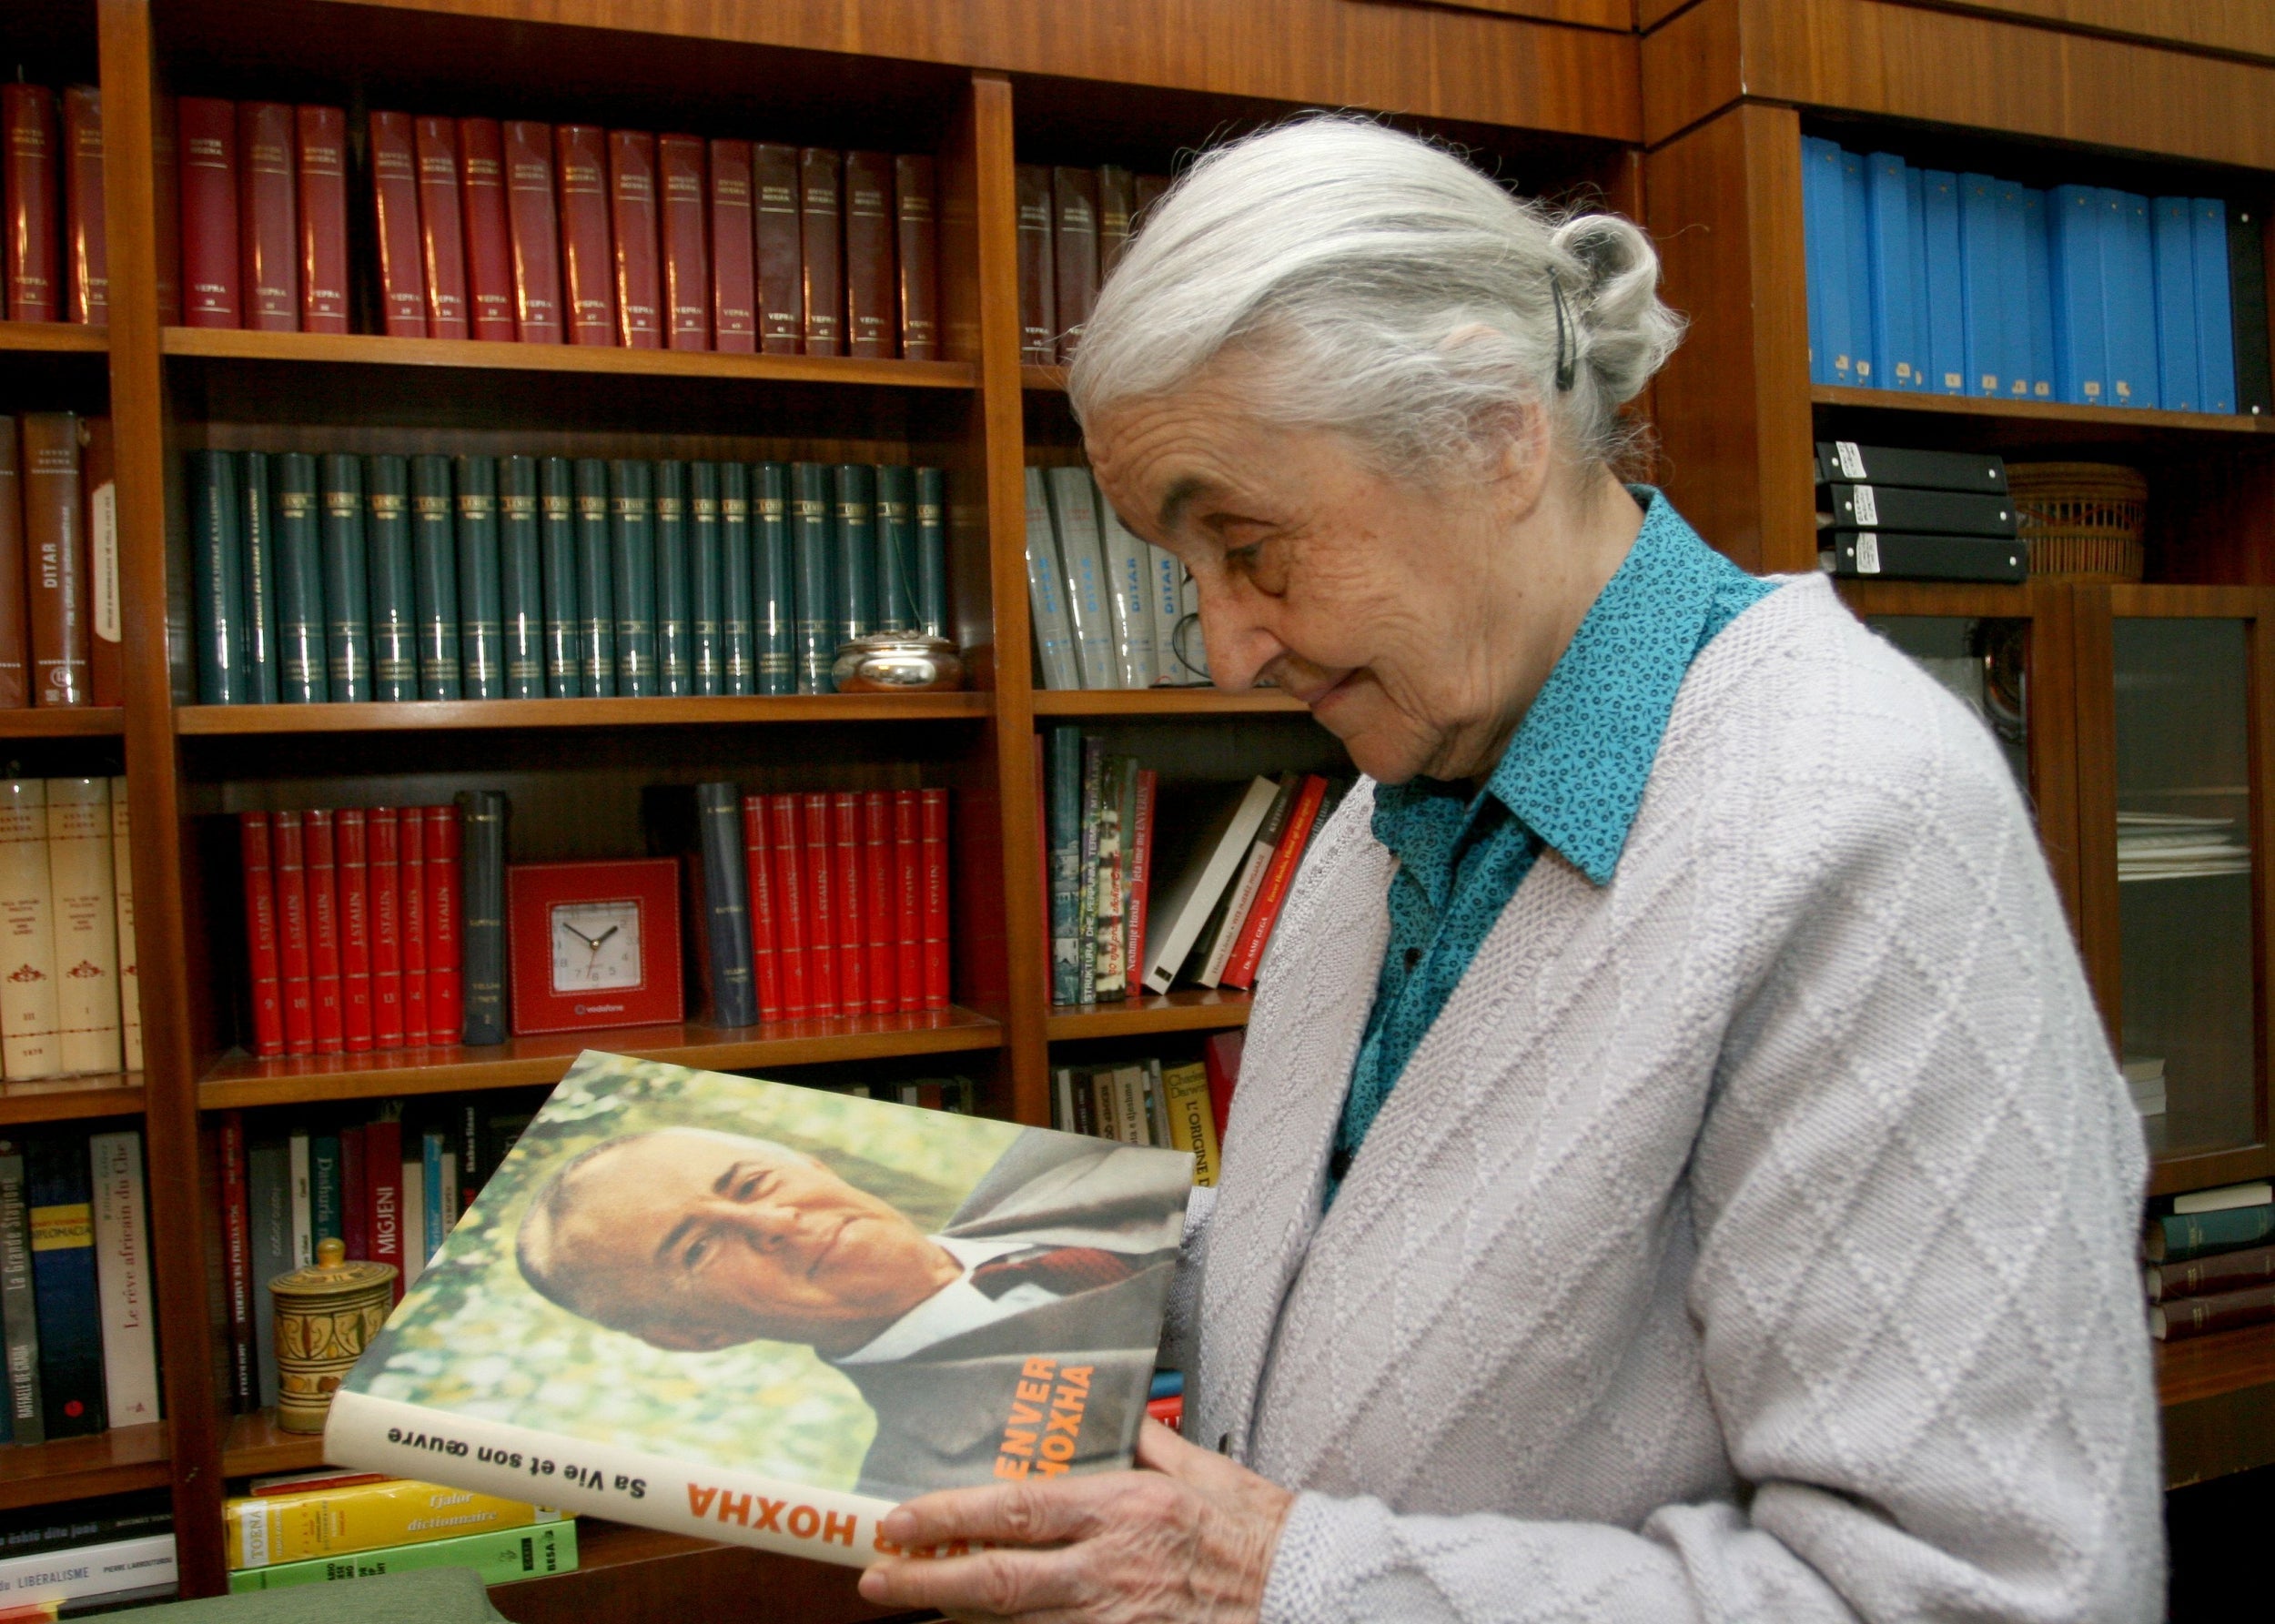 Hoxha during an interview in 2008 (AFP/Getty)